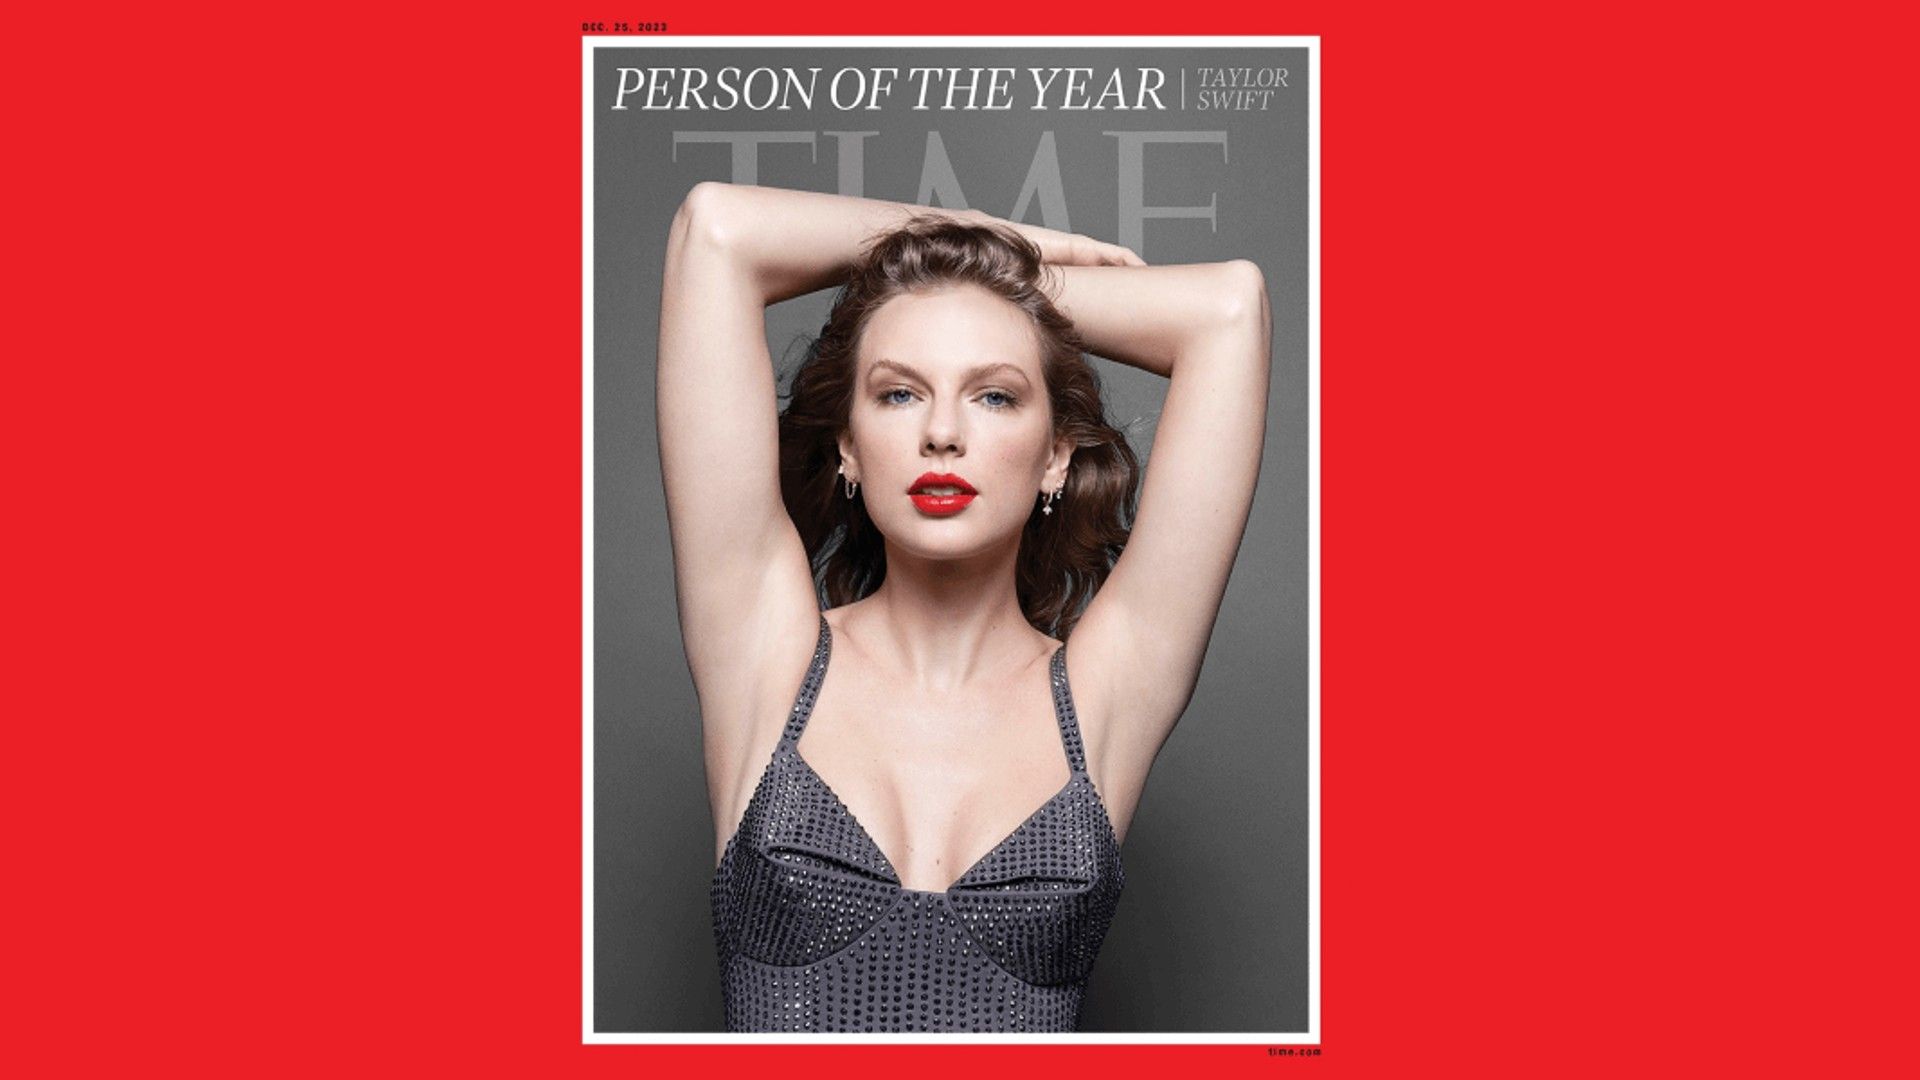 Taylor Swift became Person of the Year